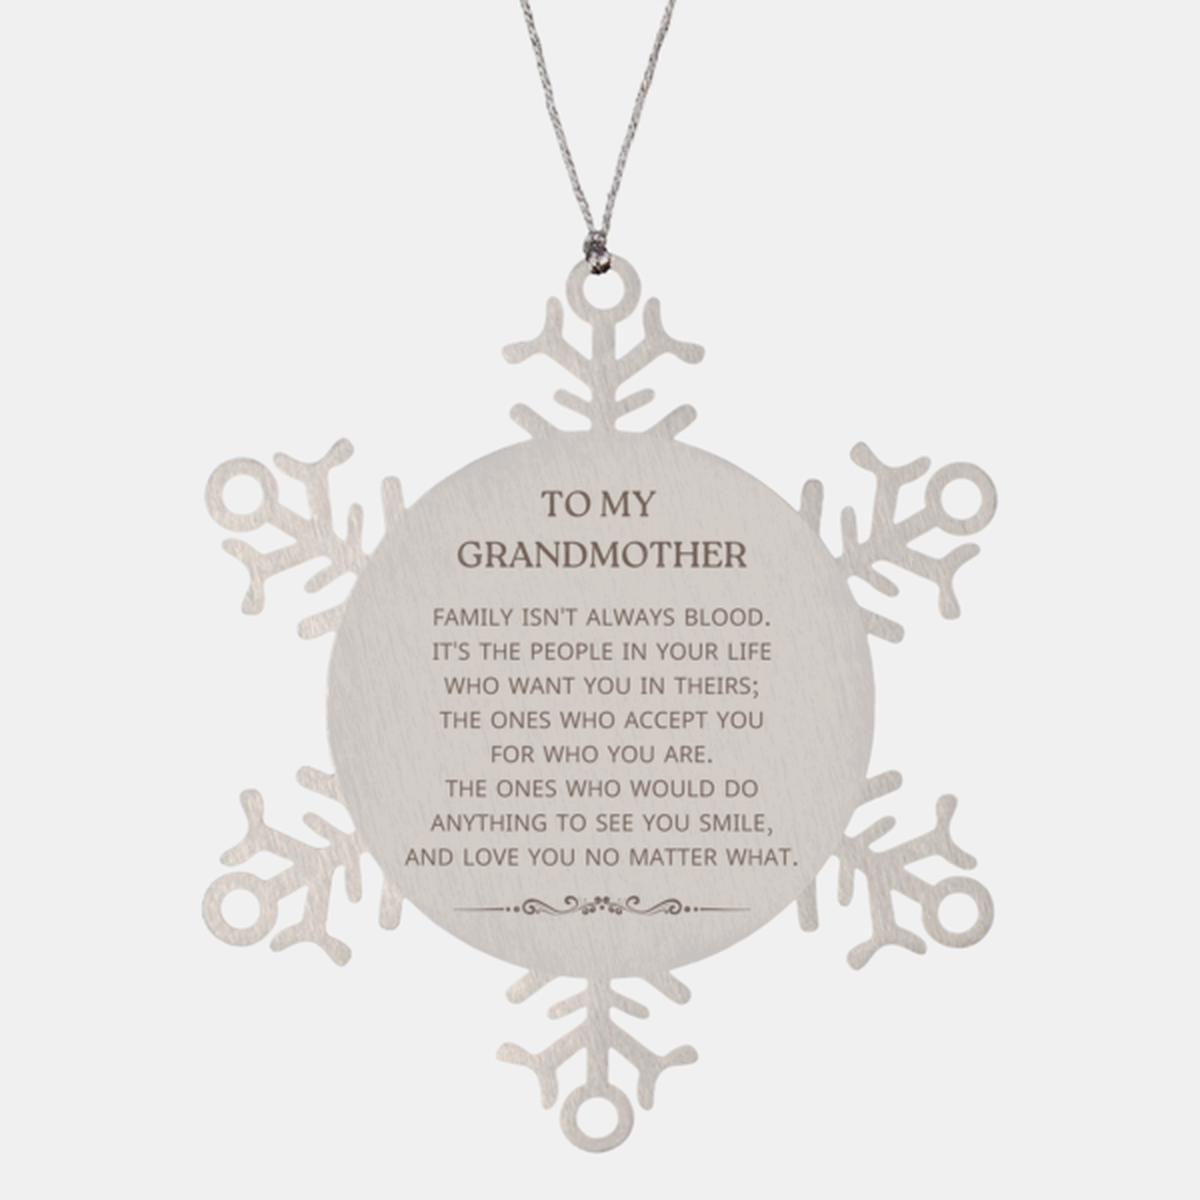 To My Grandmother Gifts, Family isn't always blood, Grandmother Snowflake Ornament, Birthday Christmas Unique Present For Grandmother